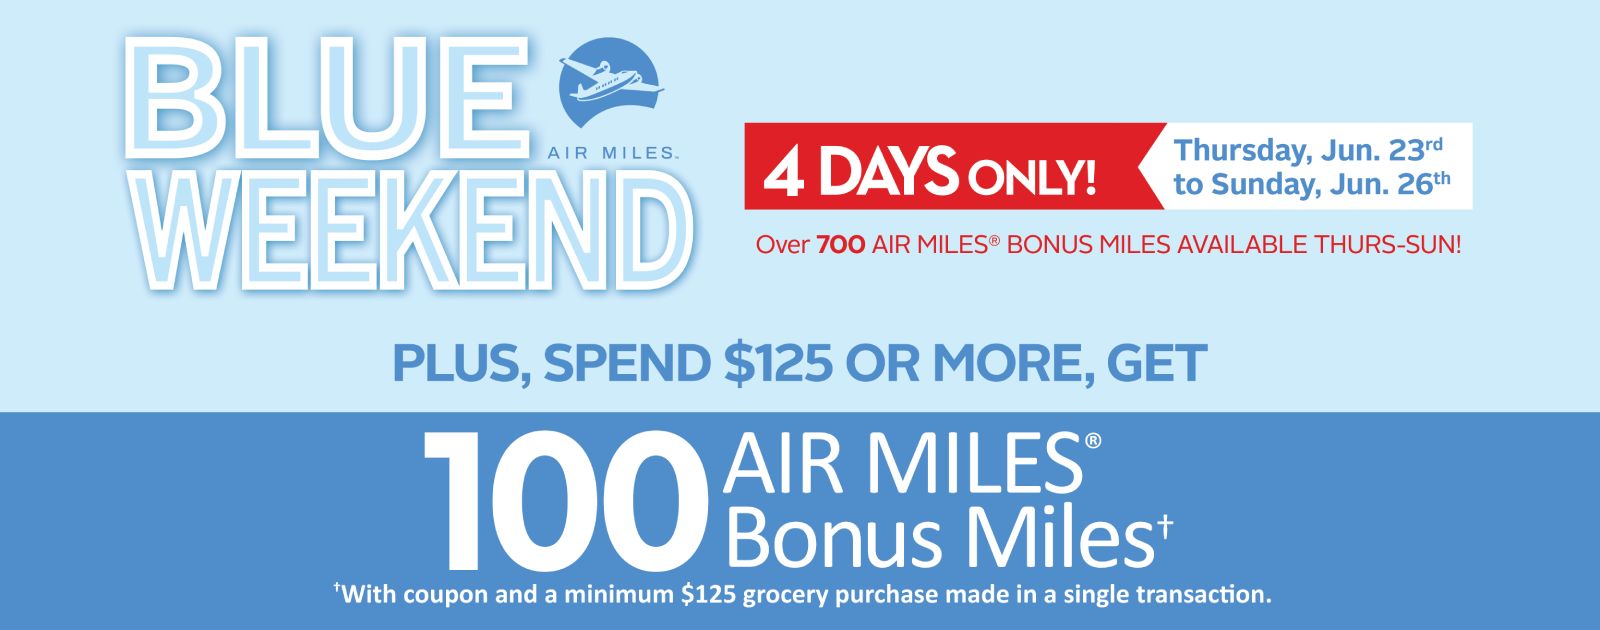 Text Reading 'Spend $125 or more, and get 100 Air Miles Bonus Miles. Get over 1300 Air Miles Bonus Miles are available from Thursday, June 23rd to Sunday, June 26th. With coupon and a minimum of $125 grocery purchase made in a single transaction.'